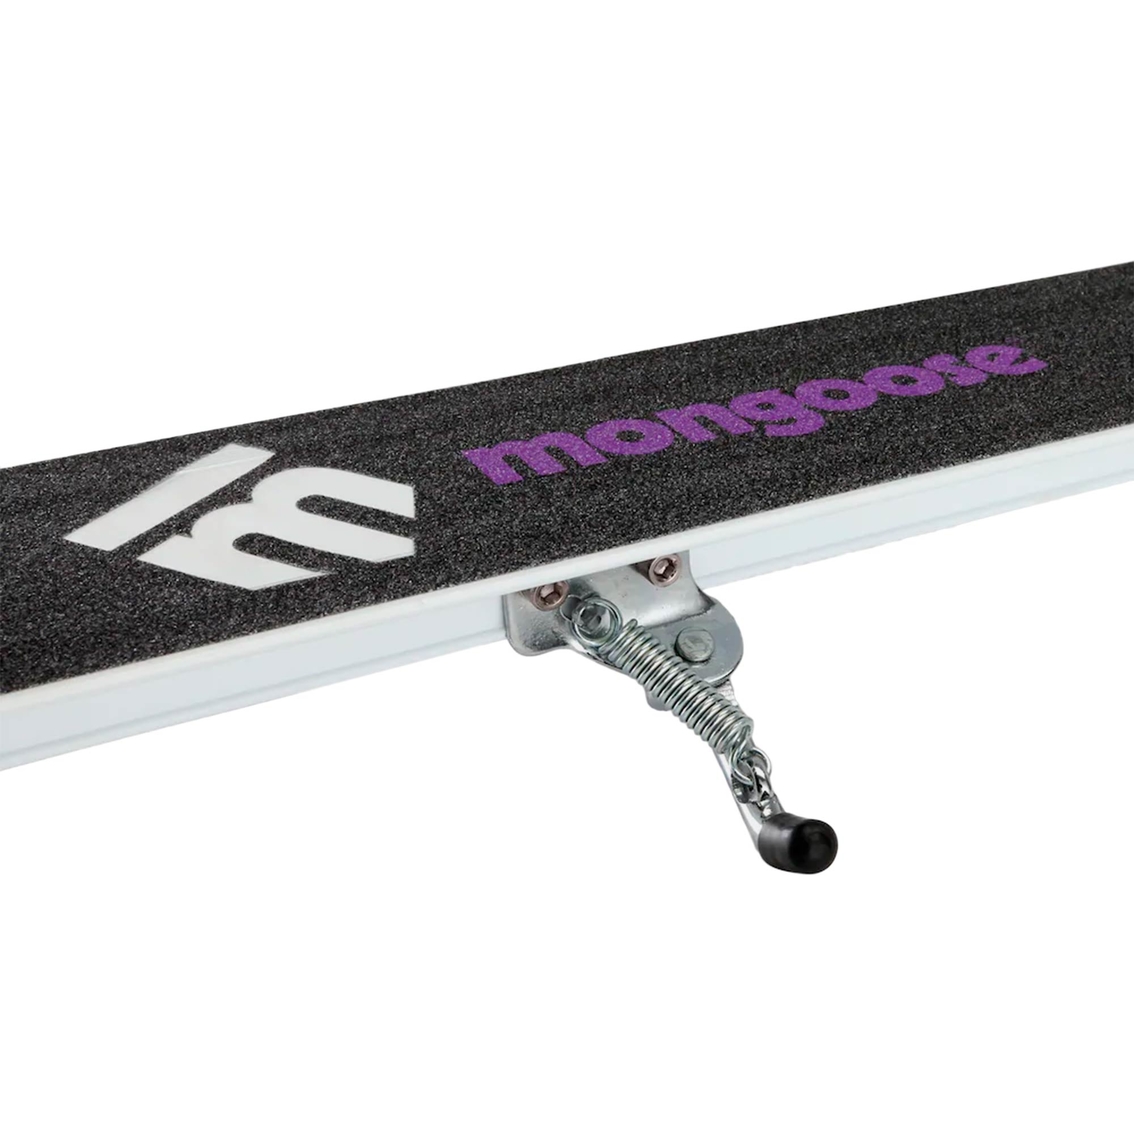 Mongoose Force 2.0 Folding Scooter - Image 8 of 9